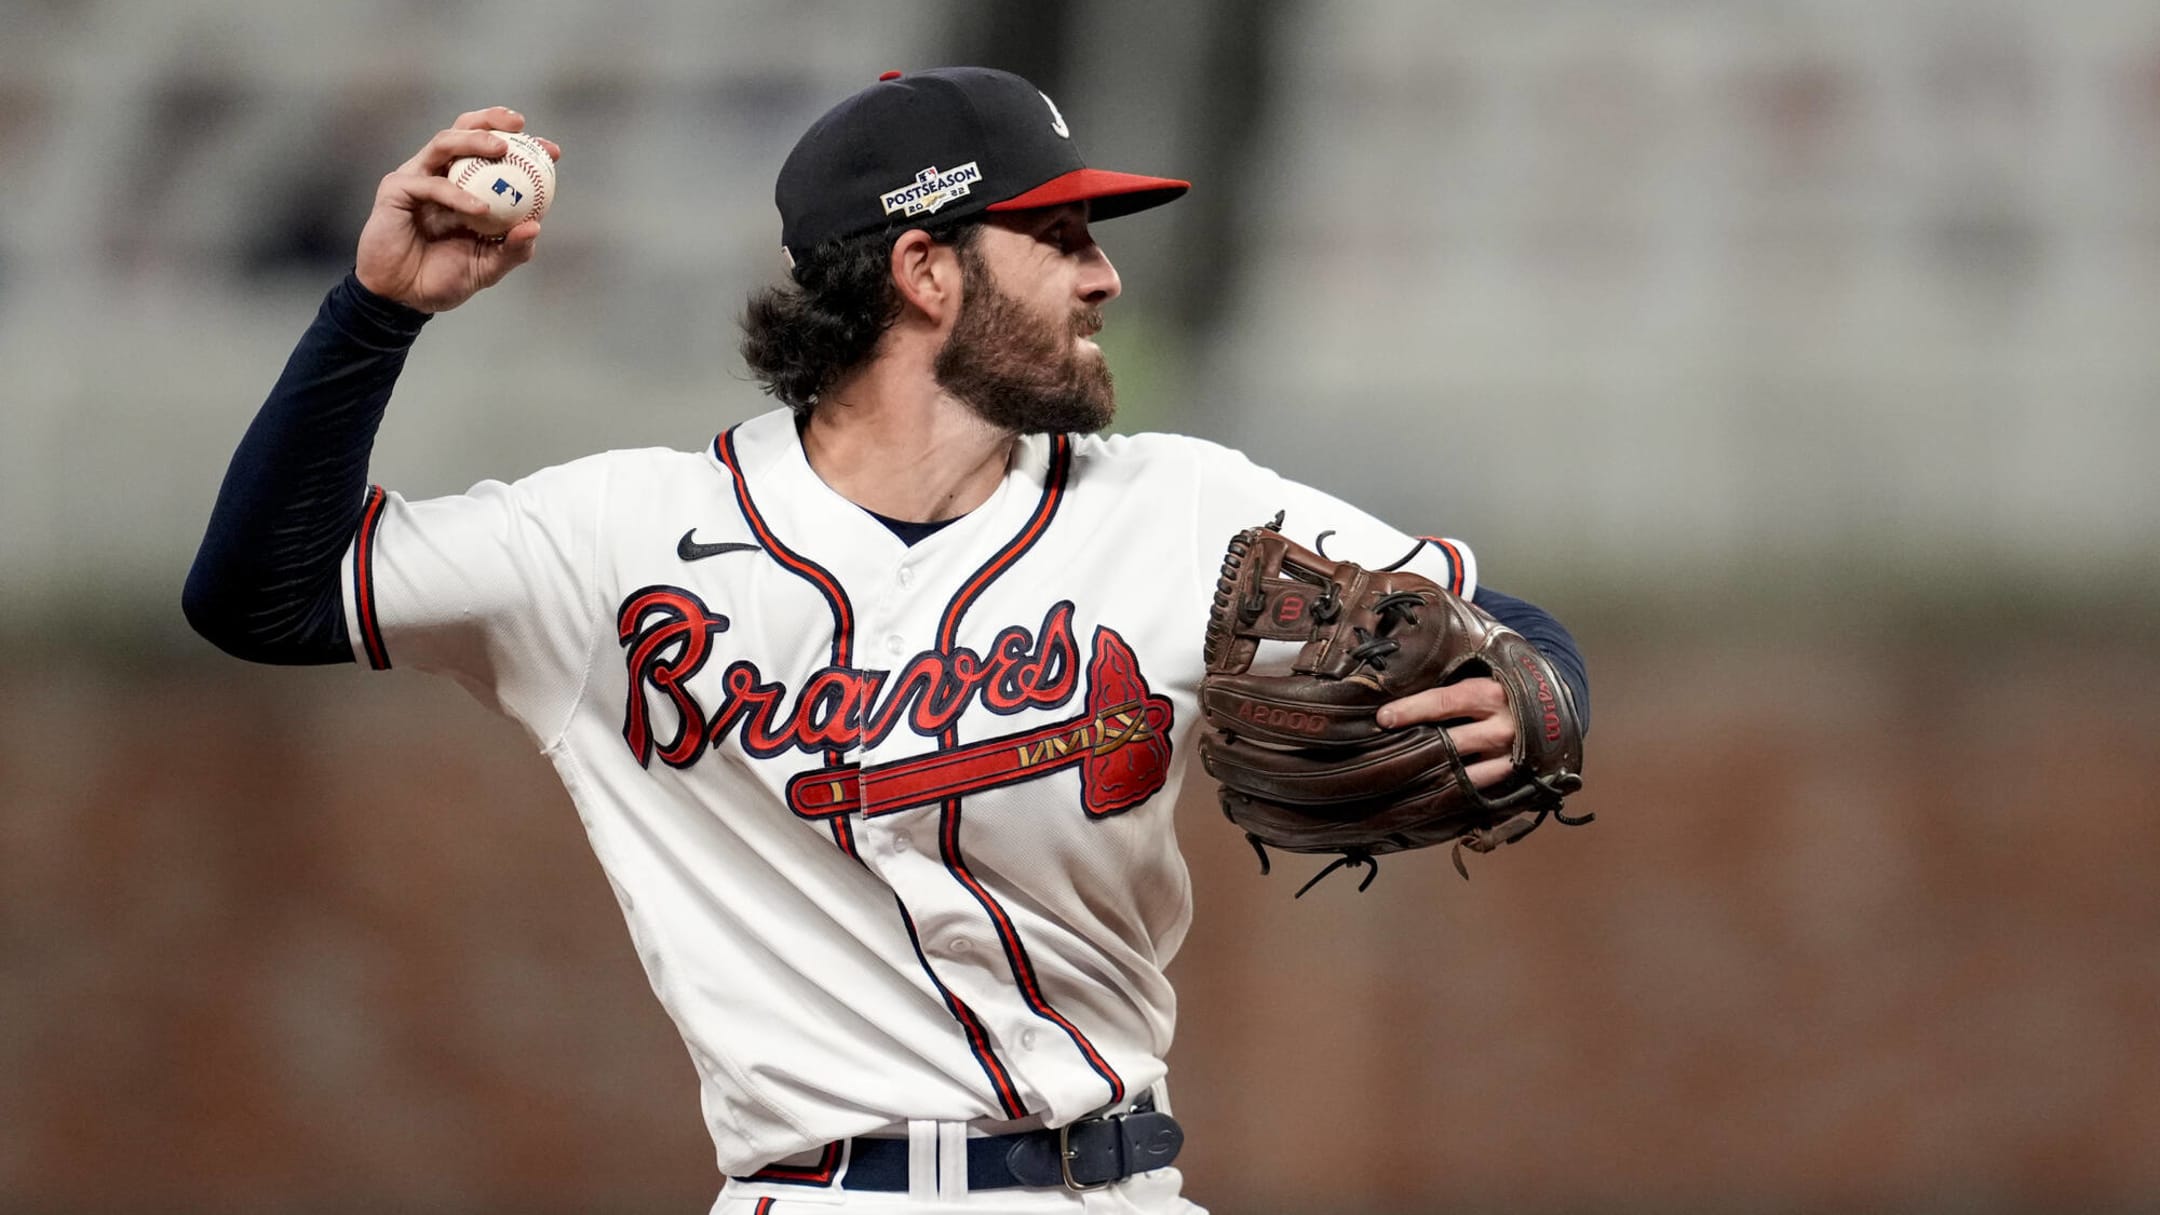 Braves Opening Day preview 2022